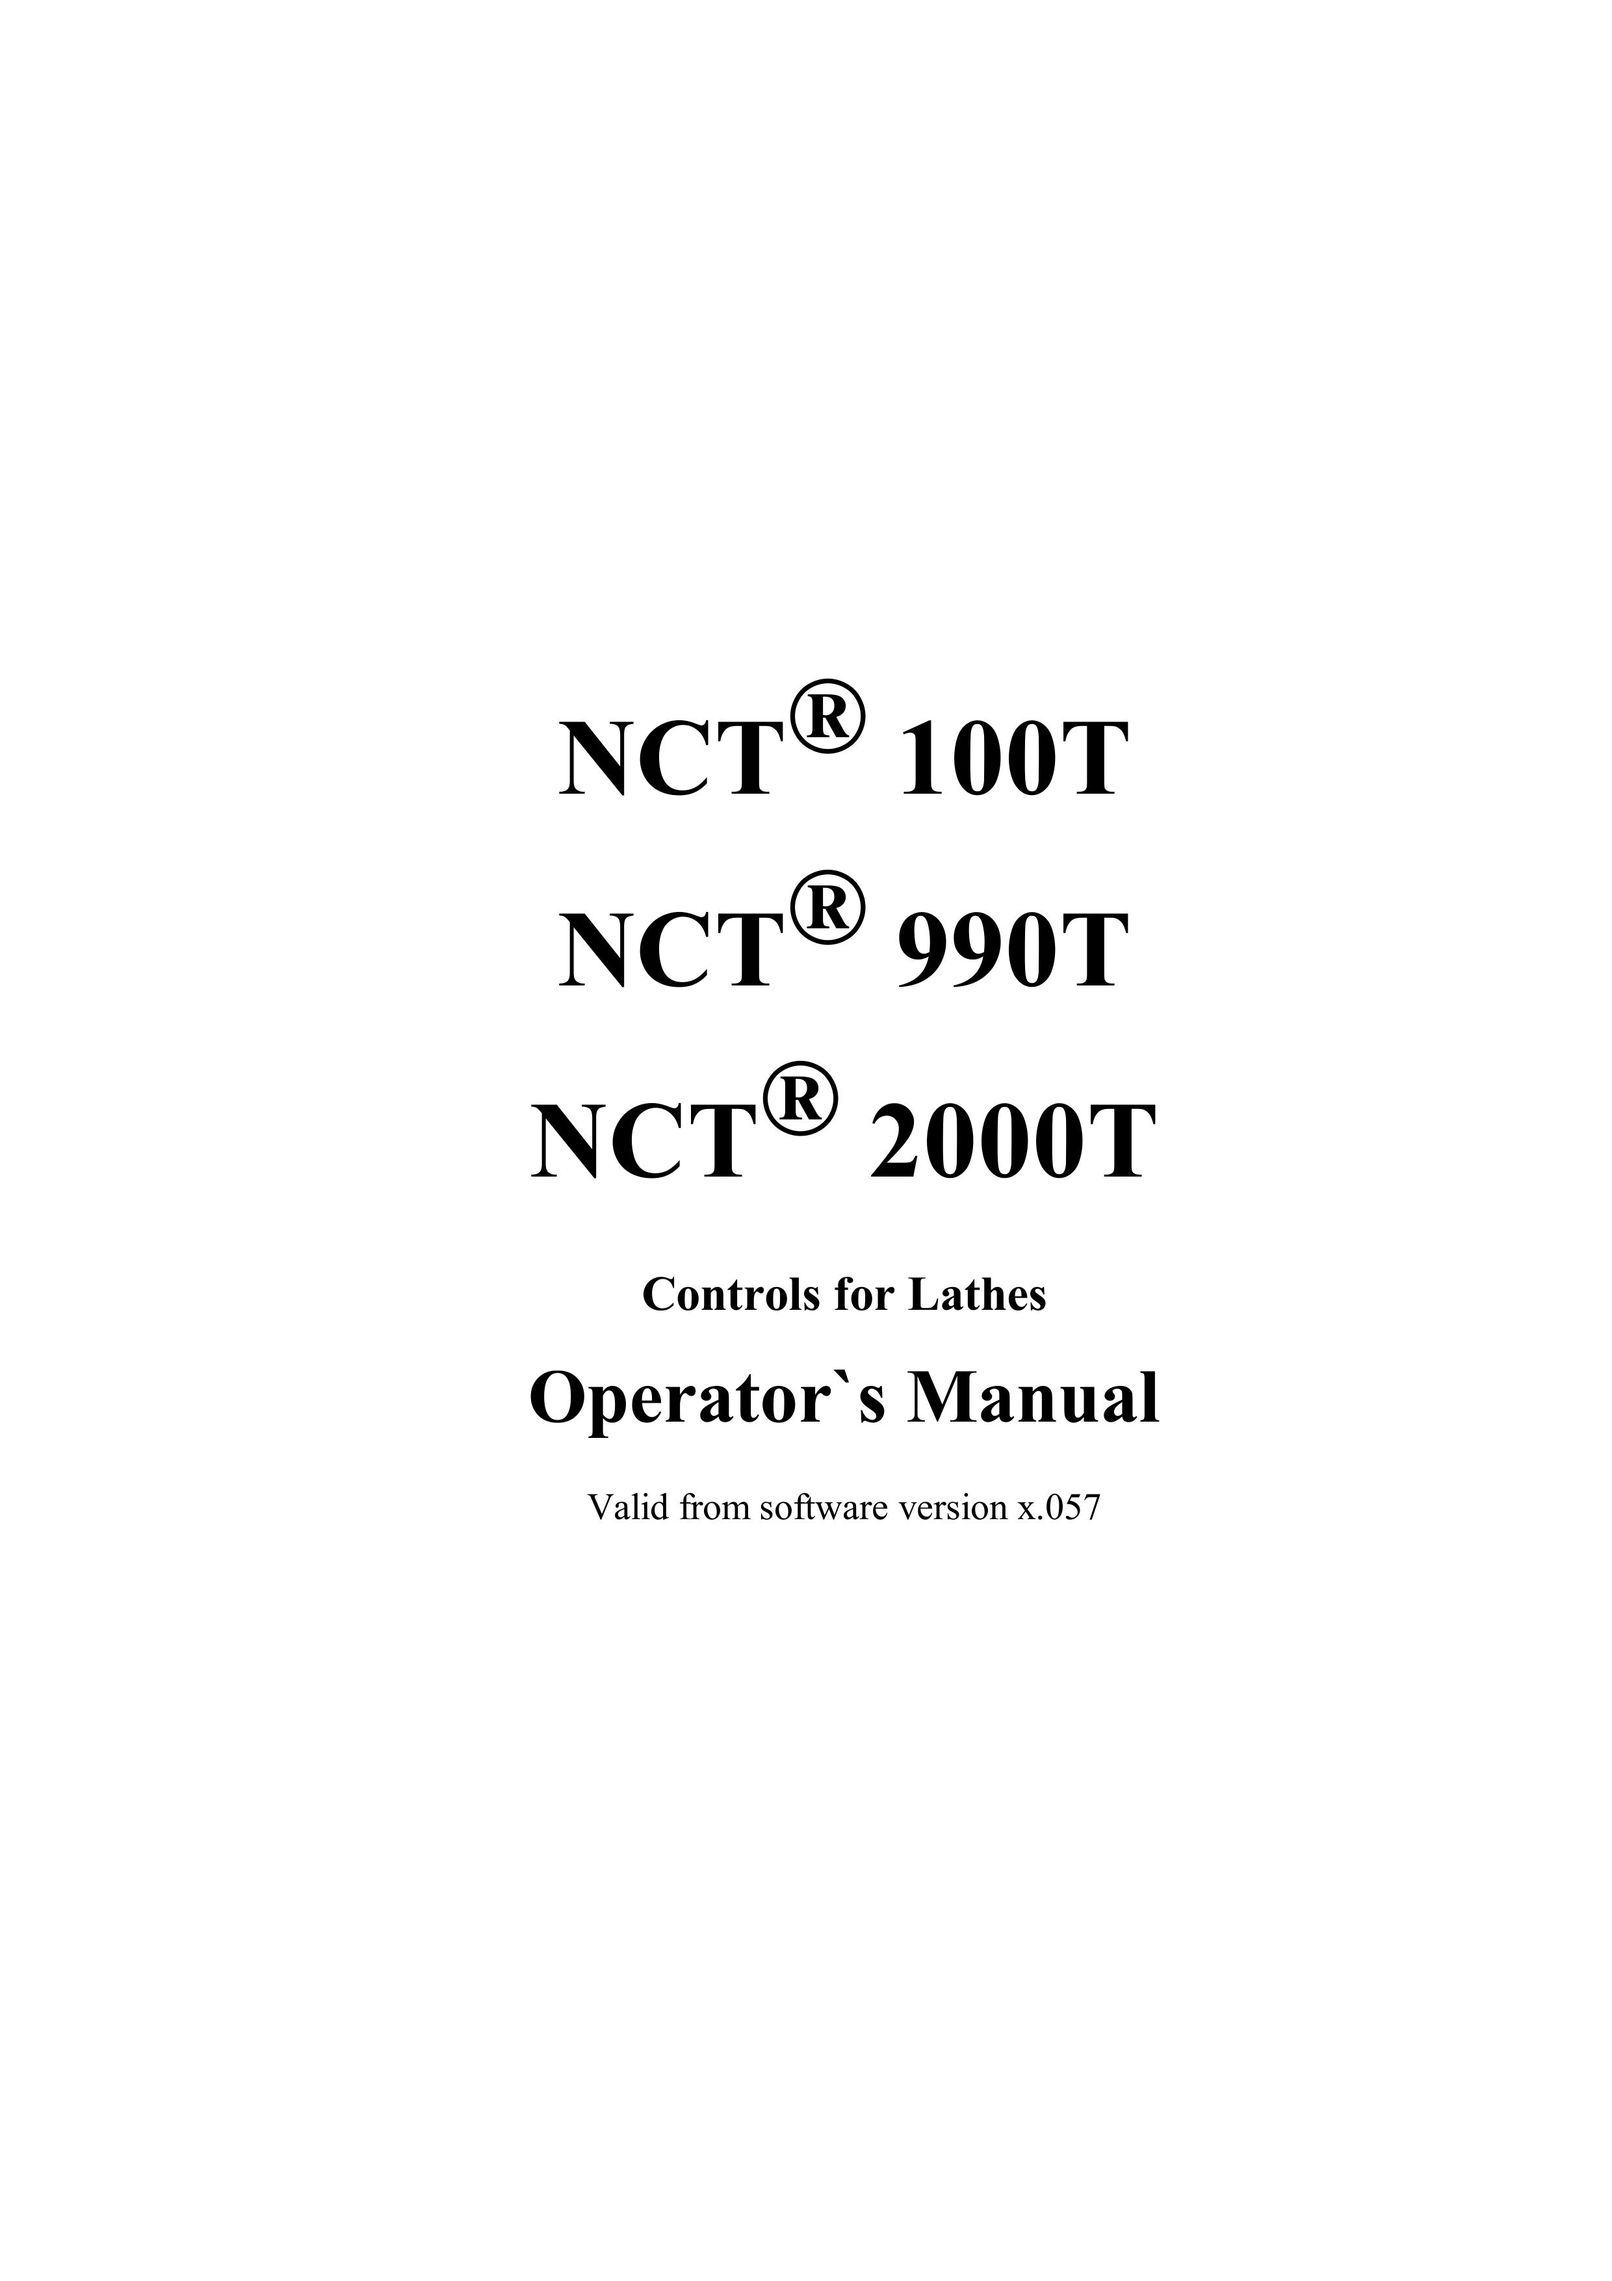 NCT Group NCT 990T Lathe User Manual